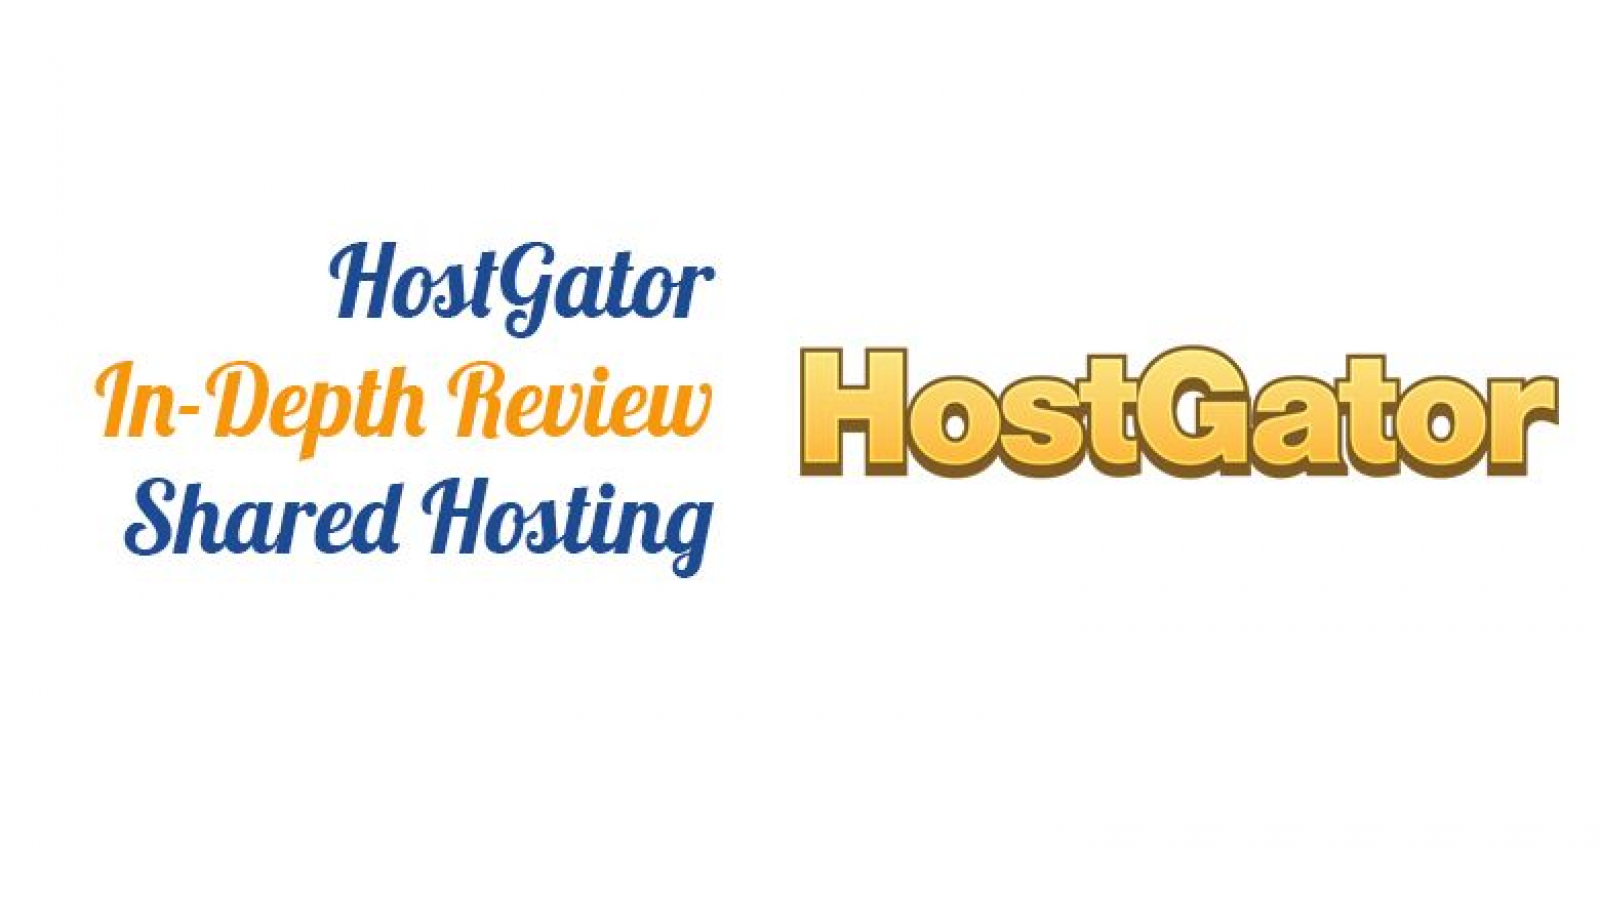 hostgator-in-depth-review-shared-hosting-edition-featured-compressed